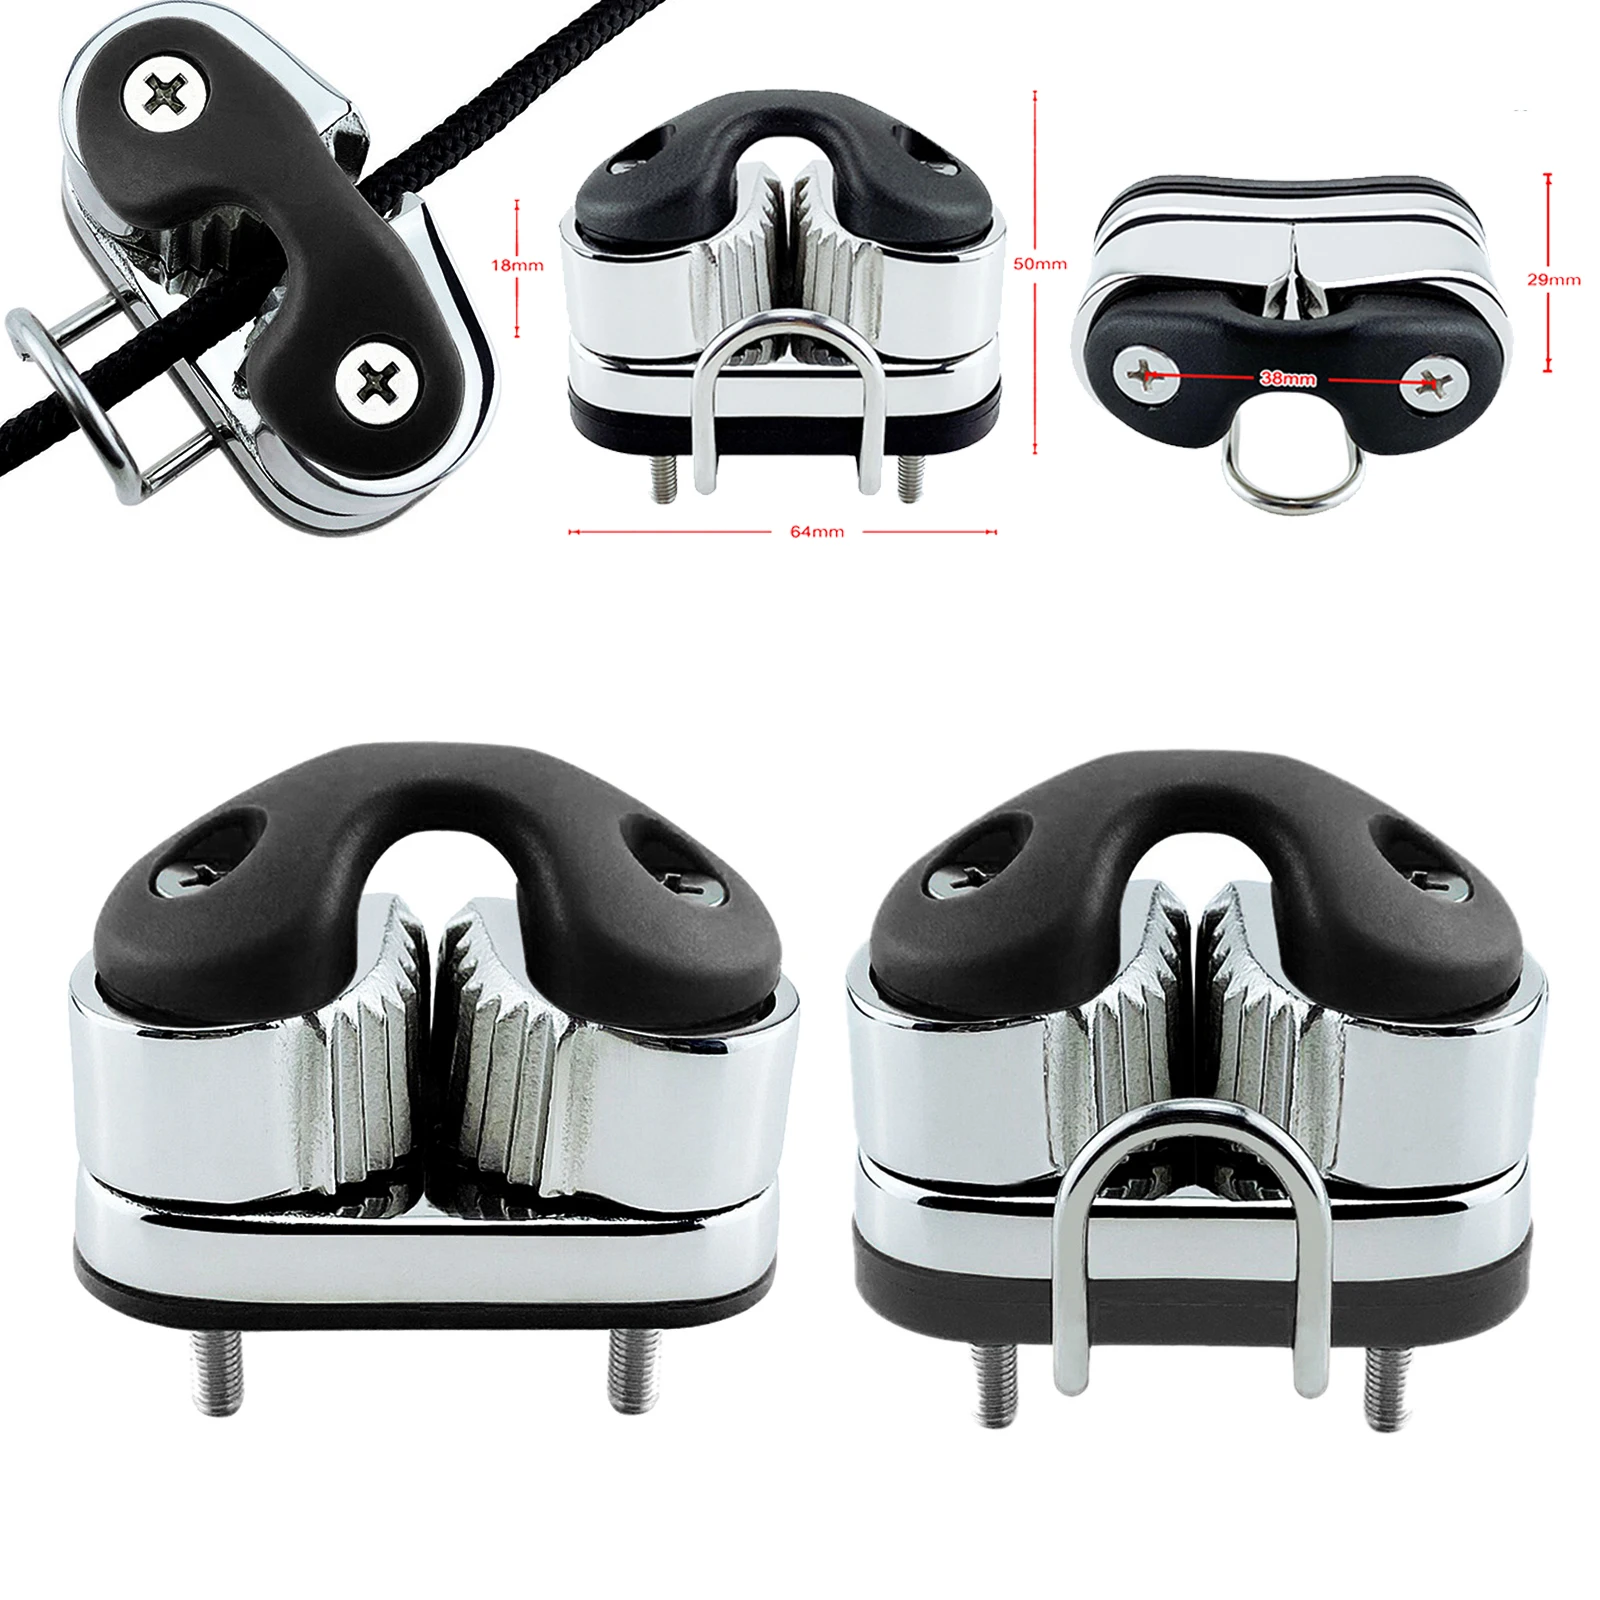 316 Stainless Steel 2 Row Ball Bearing Cam Cleat for Fairlead Sailing Sailboat For Rope Diameter 3-12mm 1pc